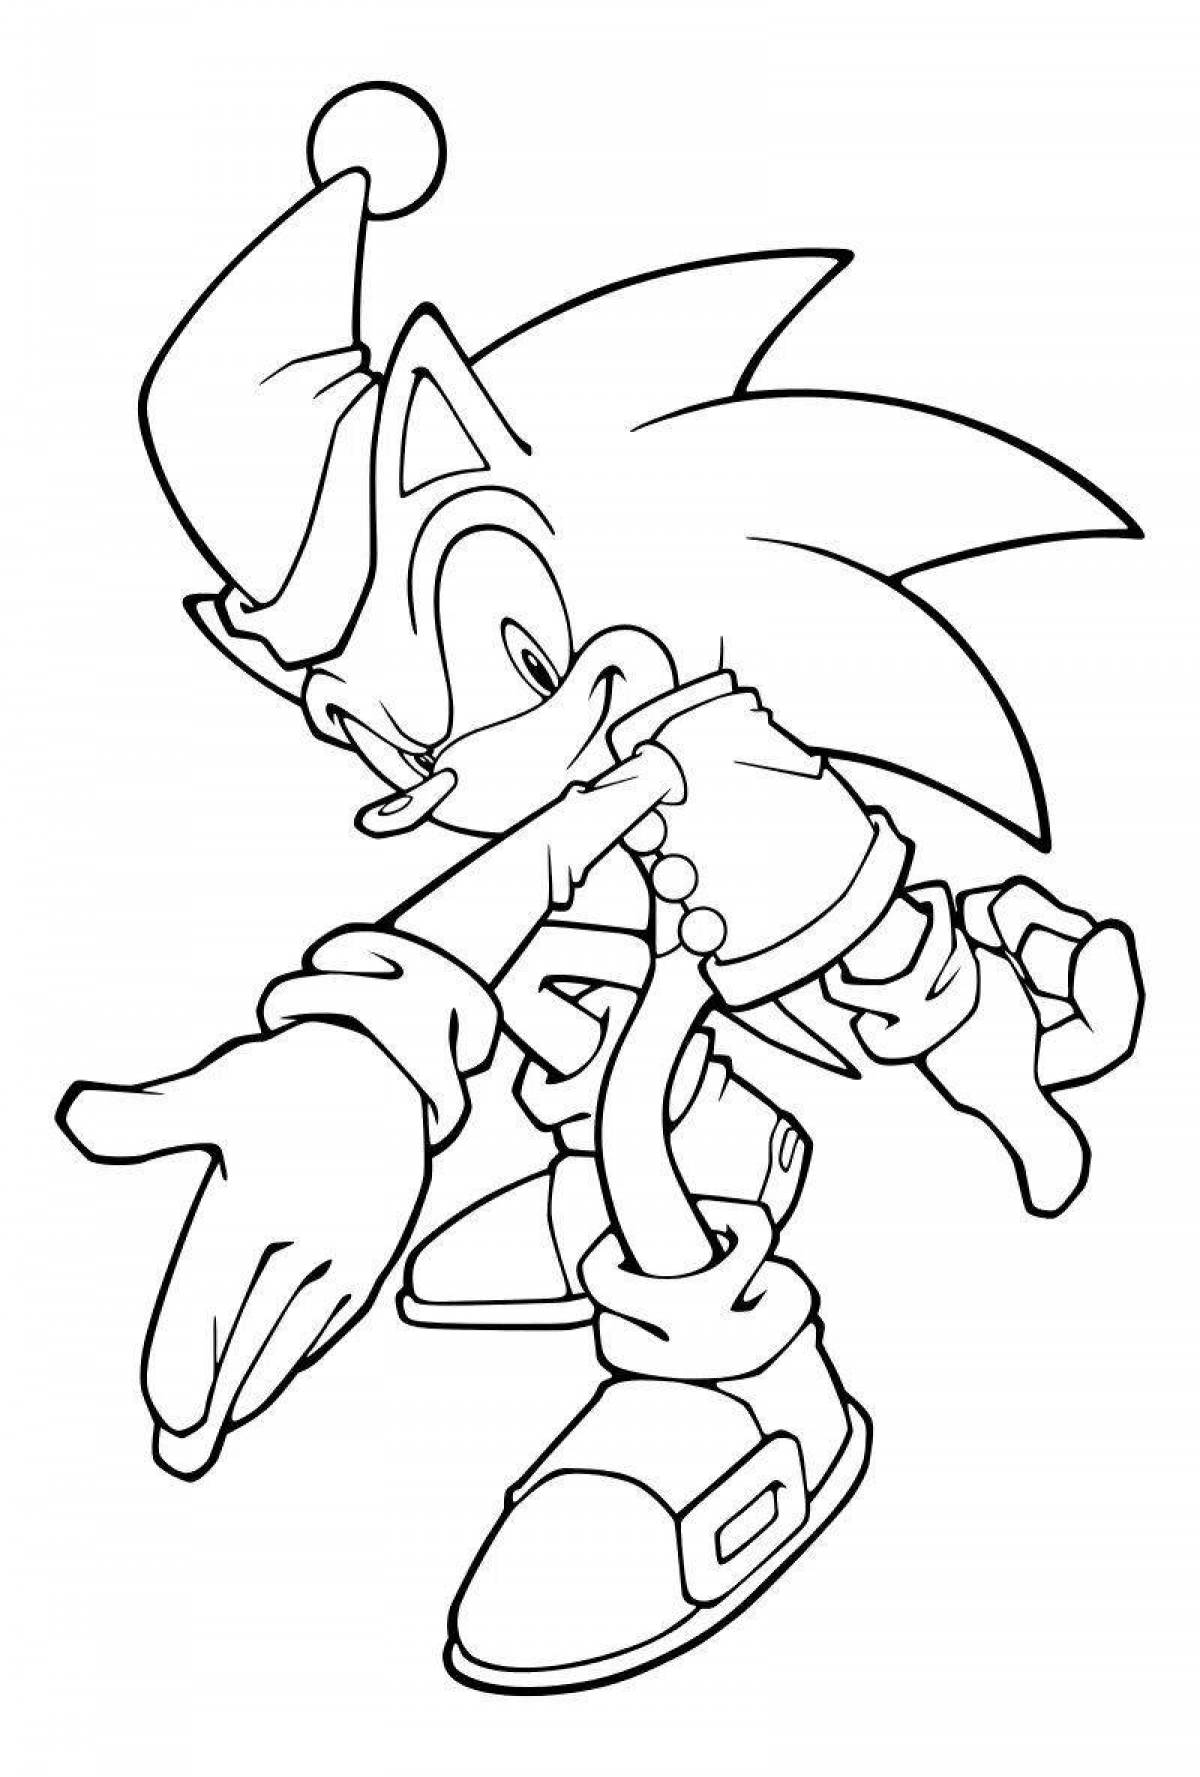 Great blue sonic coloring page